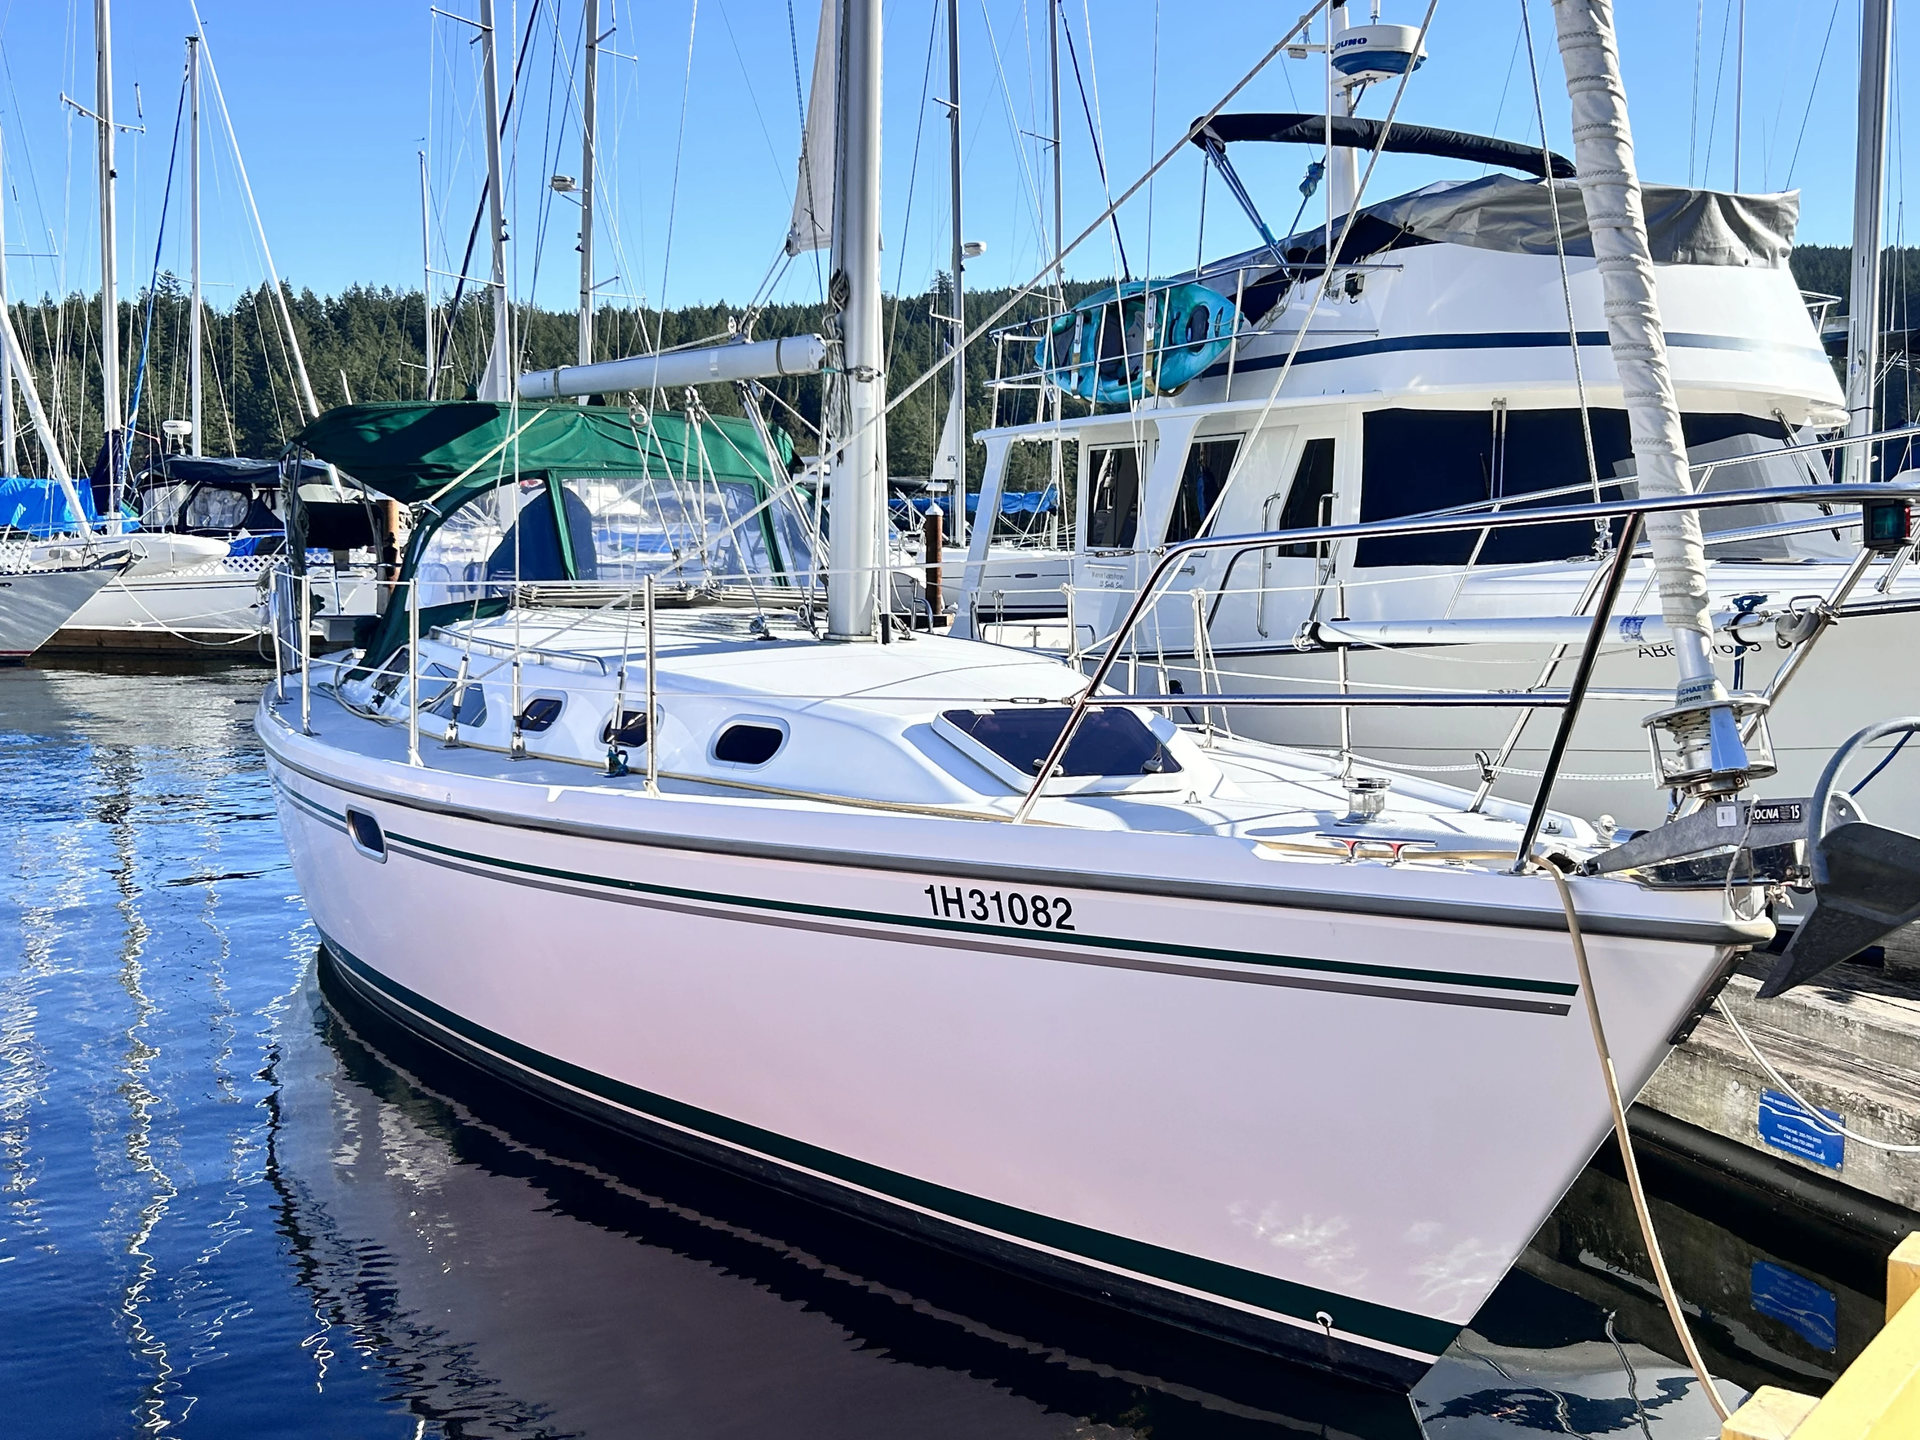 360 VR Virtual Tours of the Catalina 34 MKII